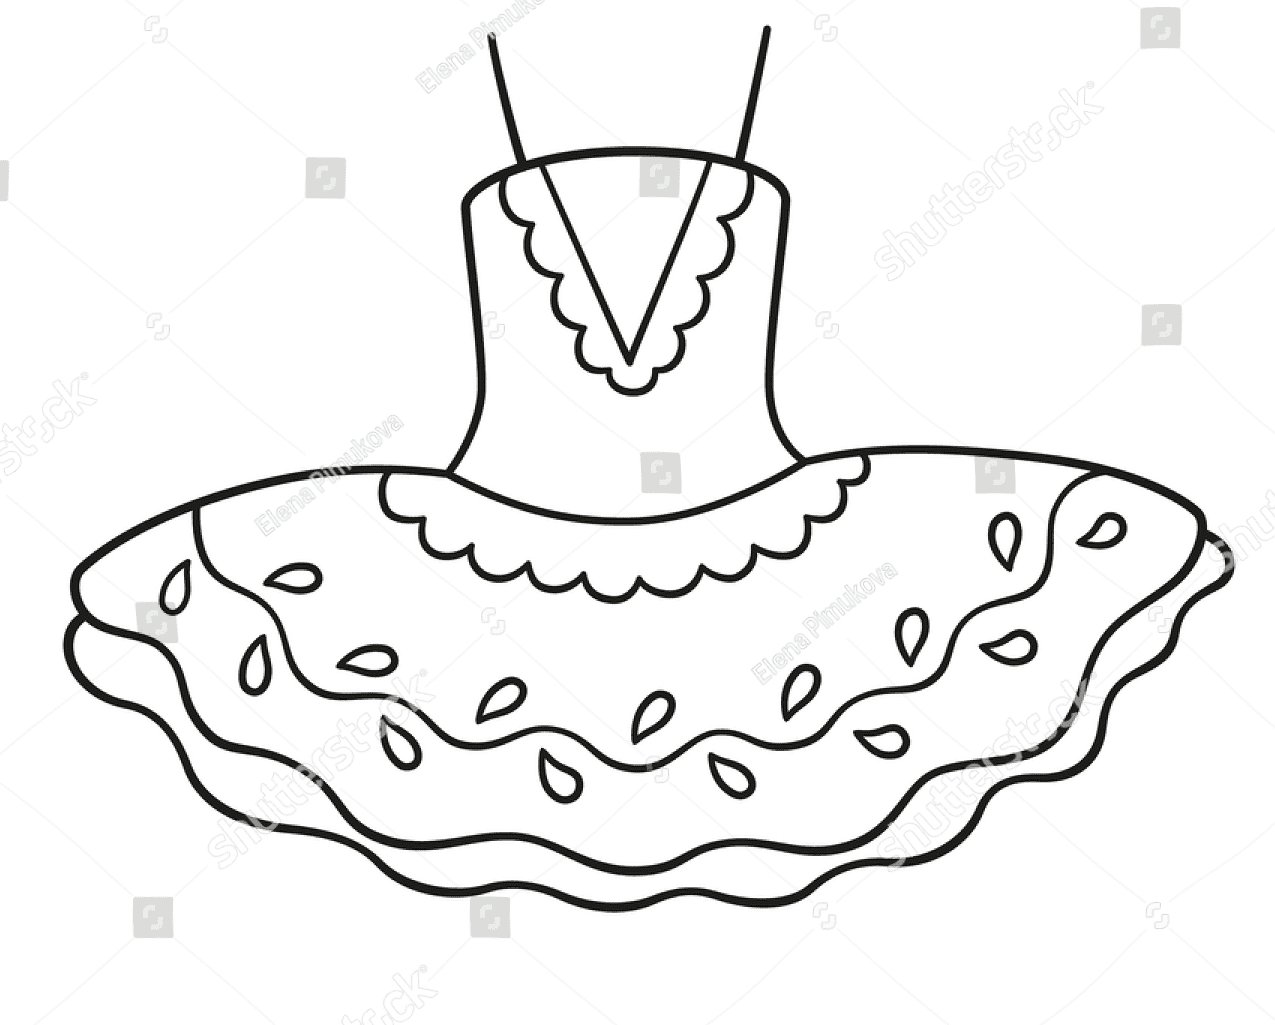 Ballerina Dress Coloring Page